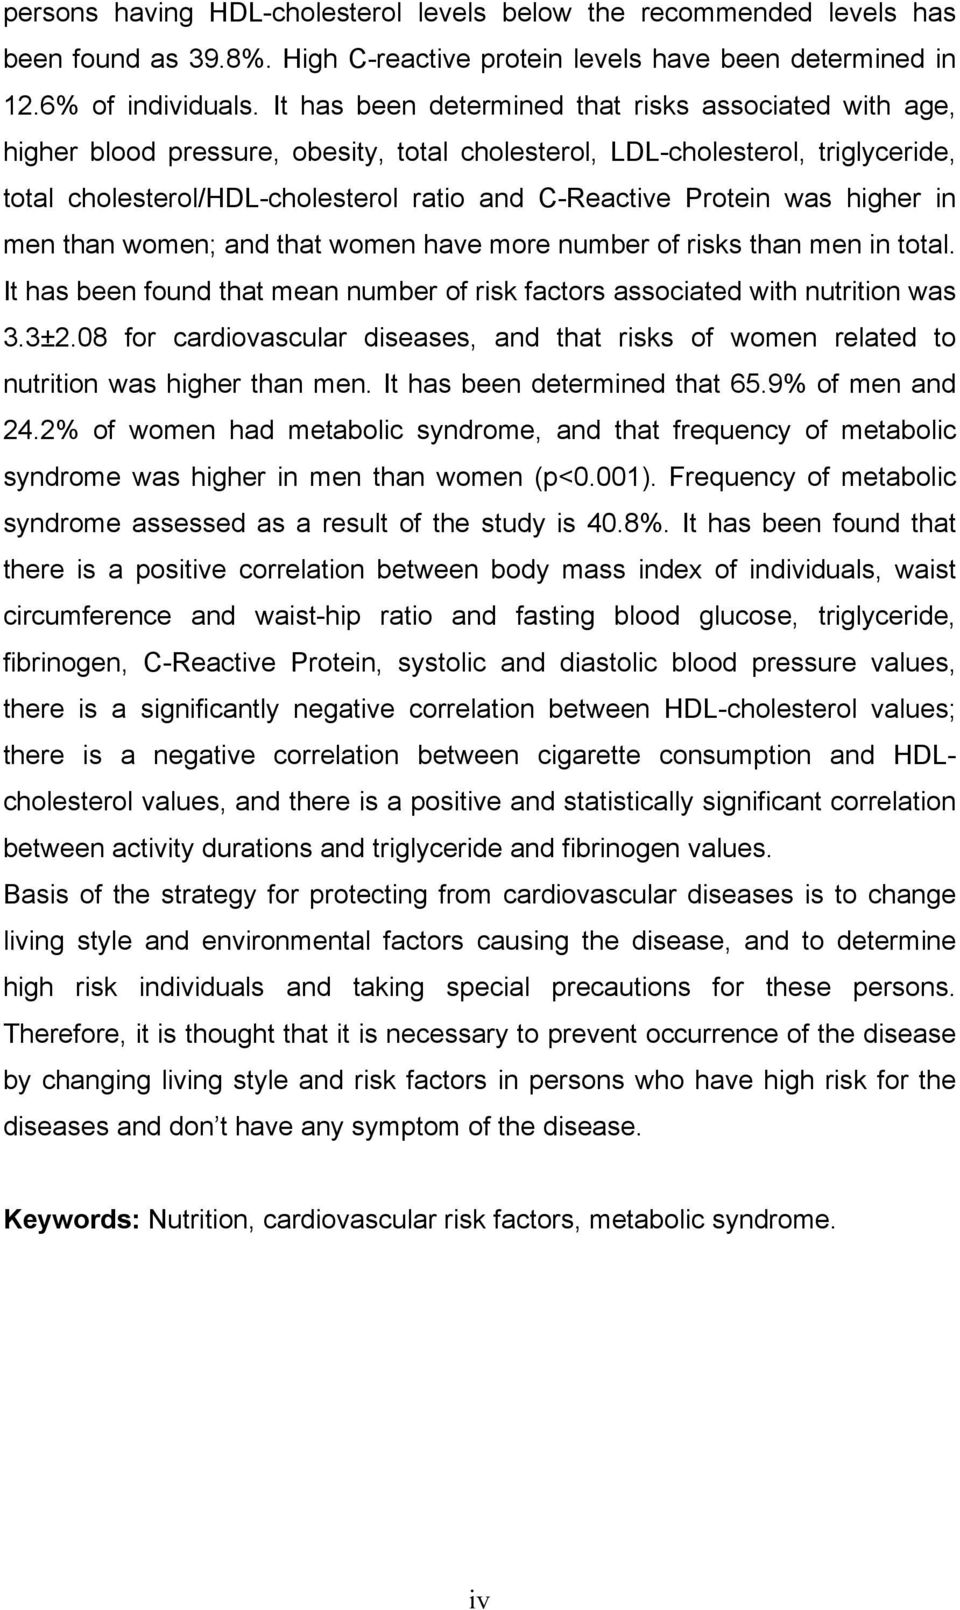 was higher in men than women; and that women have more number of risks than men in total. It has been found that mean number of risk factors associated with nutrition was 3.3±2.